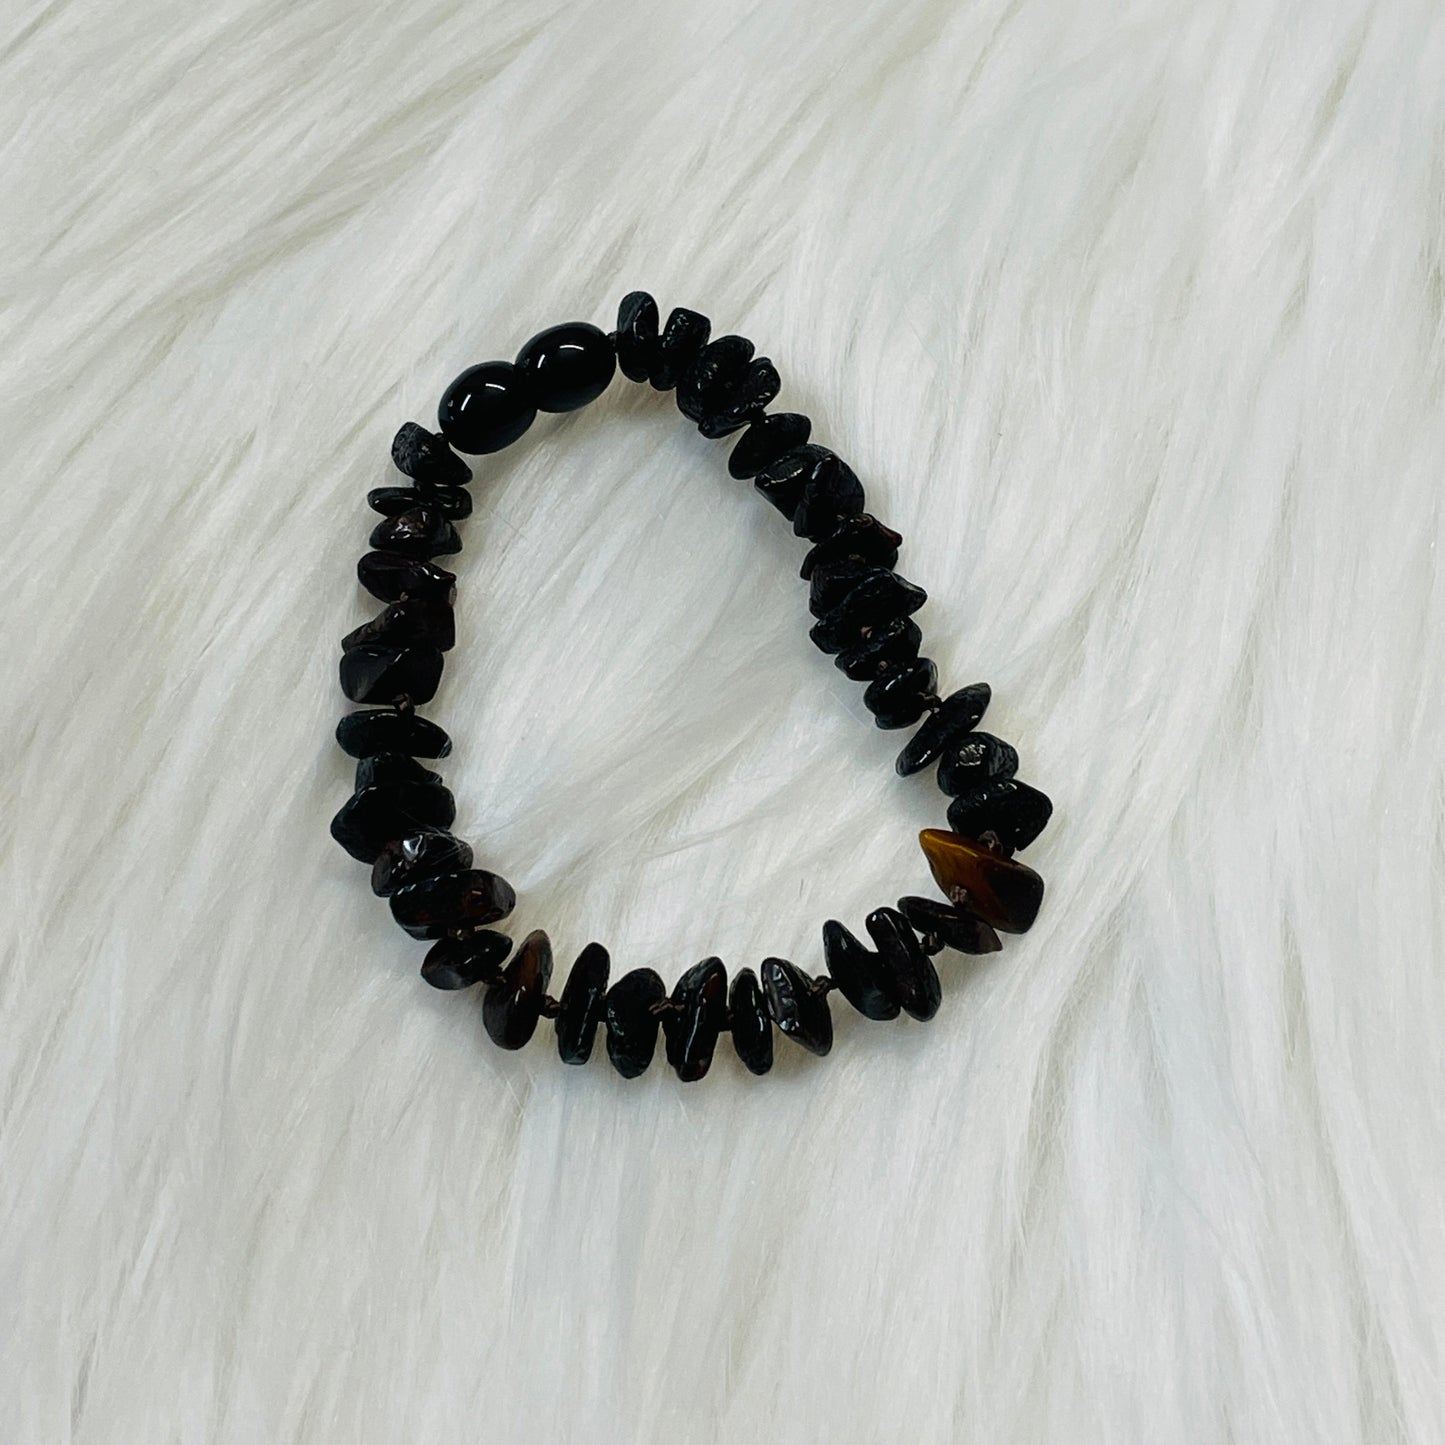 Authentic Lithuanian Baltic Amber Lightly Polished Black Anklet - 6.5"